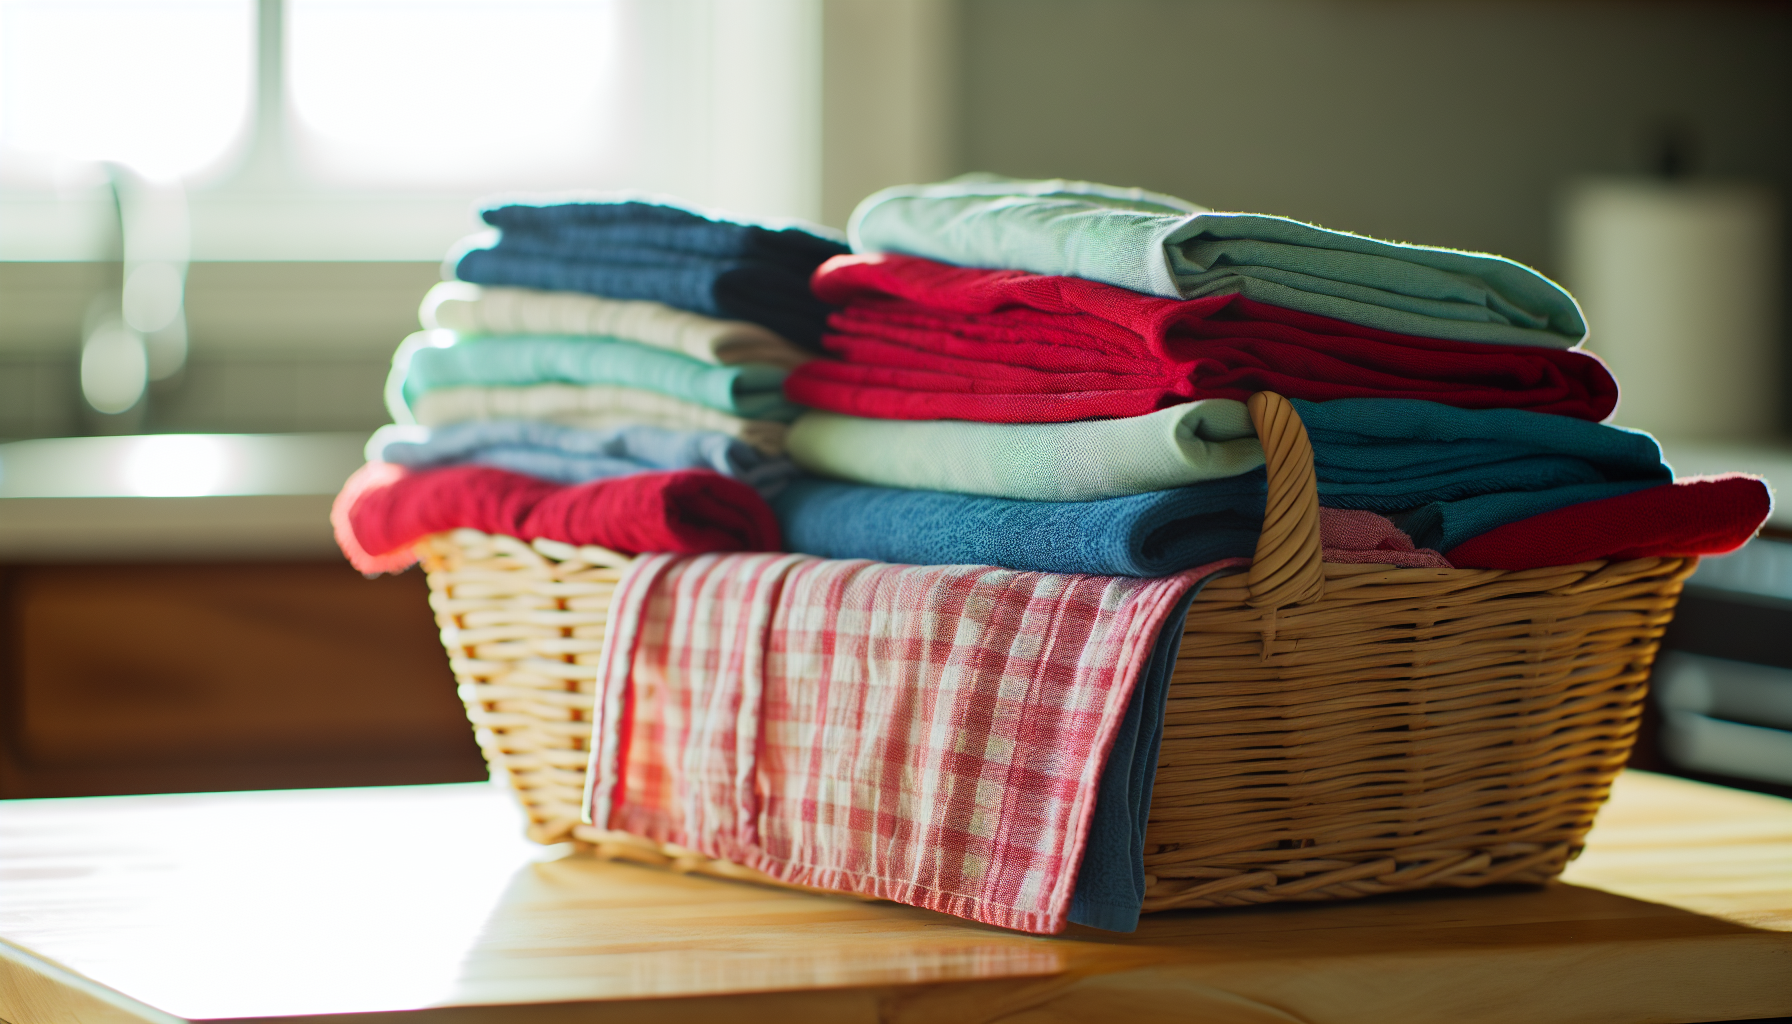 Kitchen towels neatly organized in a basket